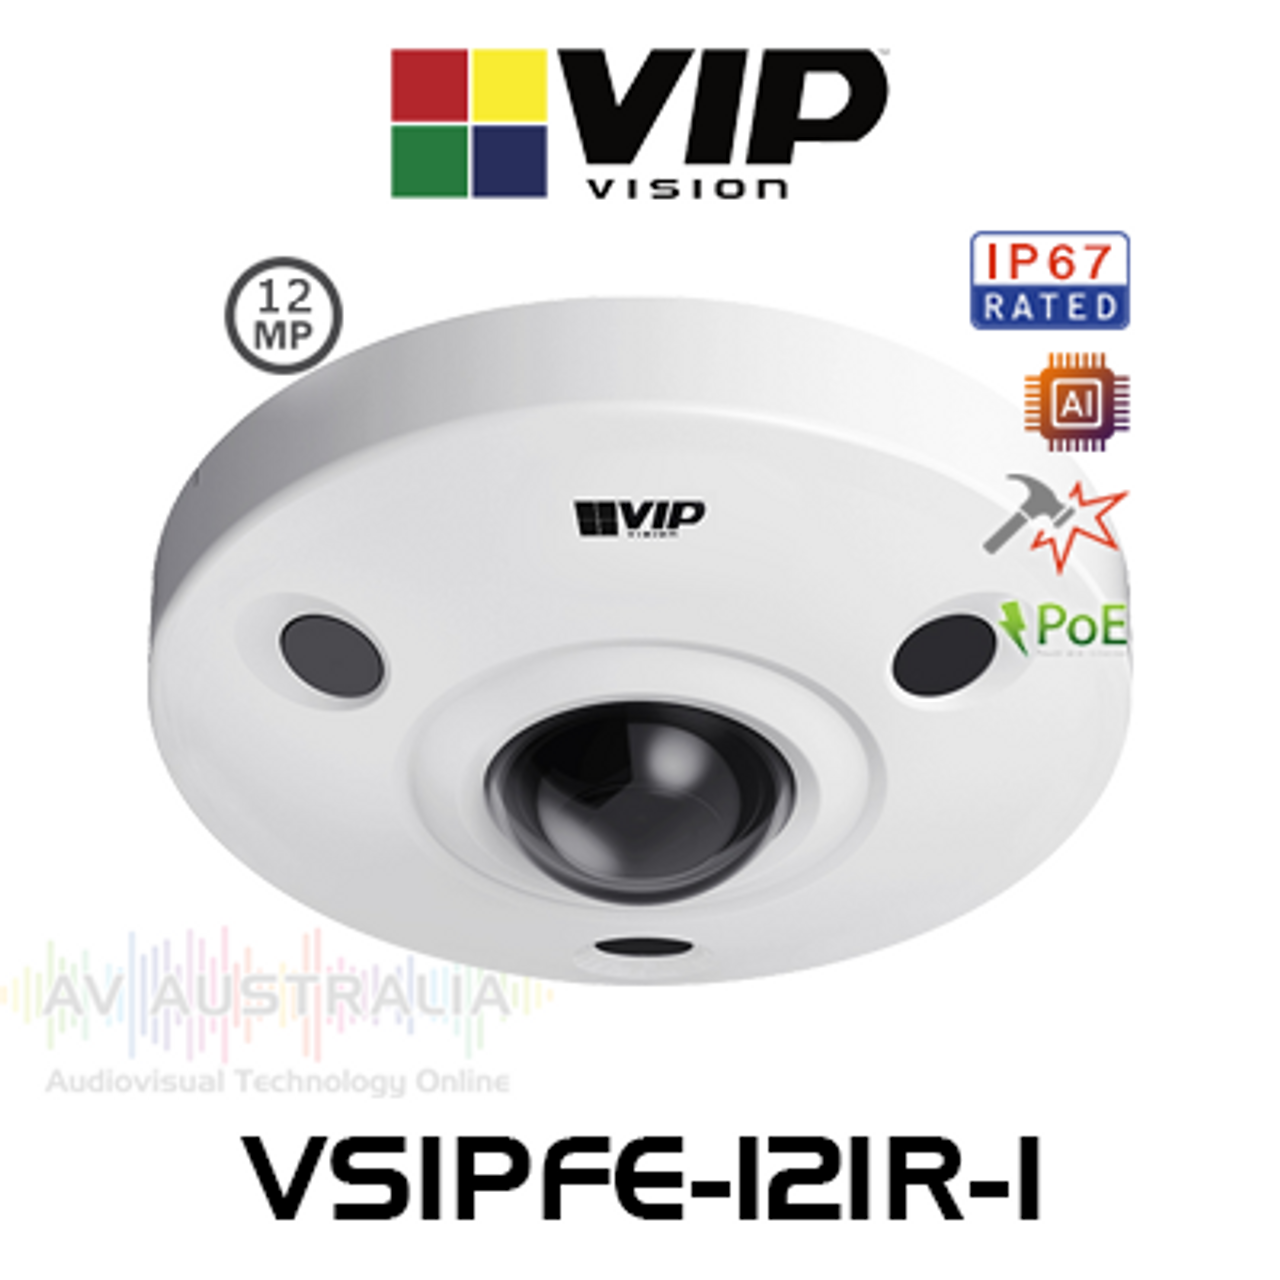 VIP Vision Specialist AI 12MP People Counting 360° IP67 Vandal PoE Fisheye Dome IP Camera